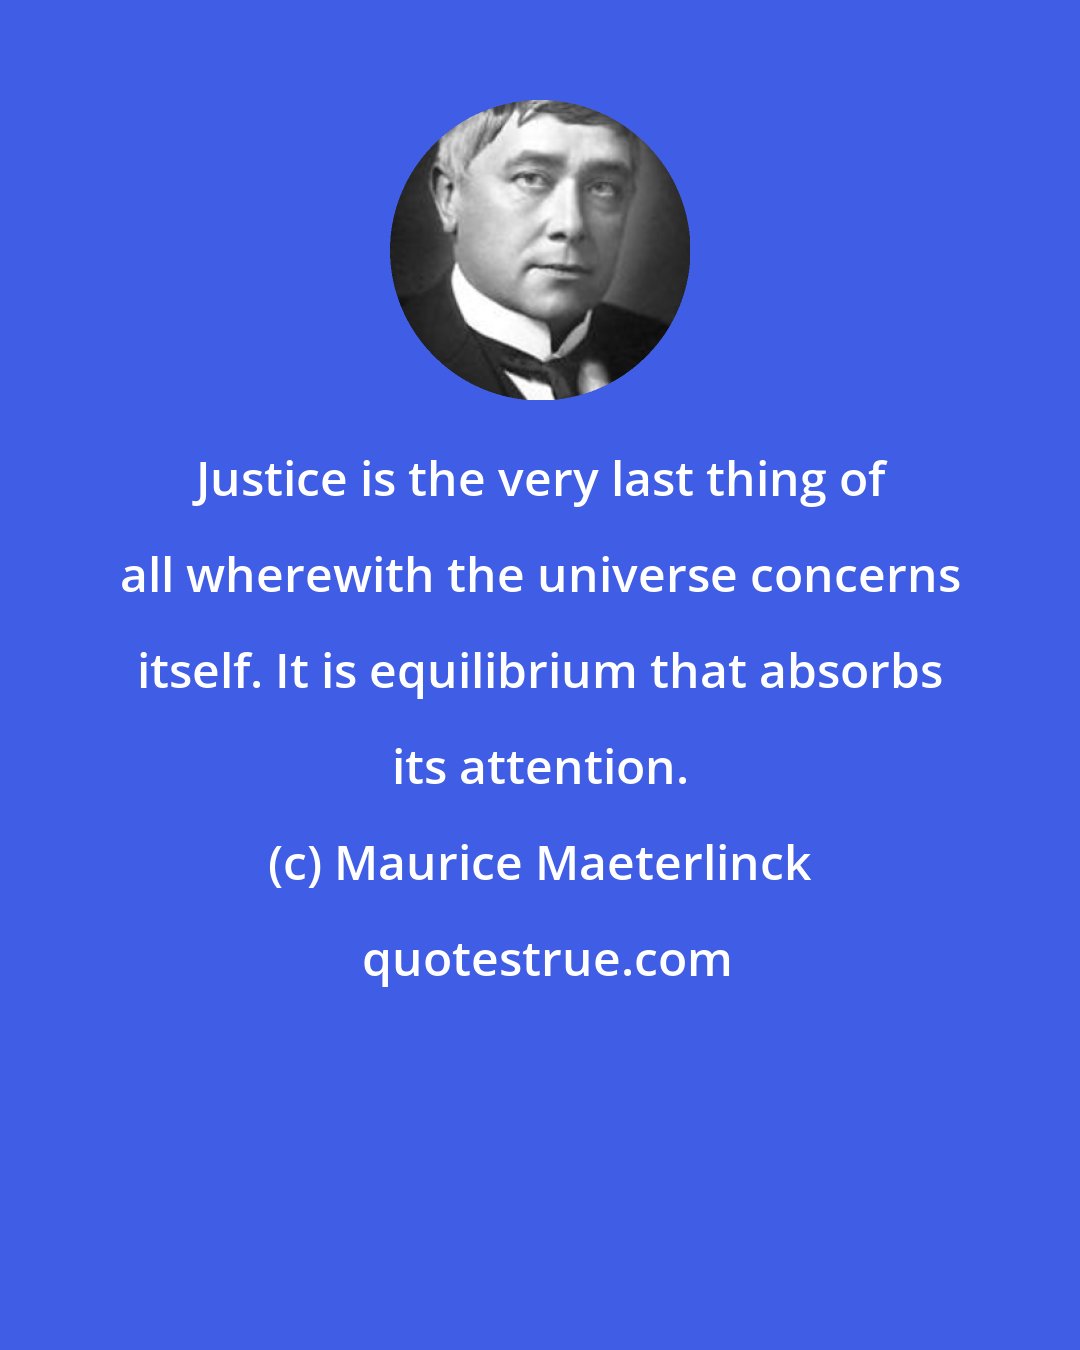 Maurice Maeterlinck: Justice is the very last thing of all wherewith the universe concerns itself. It is equilibrium that absorbs its attention.